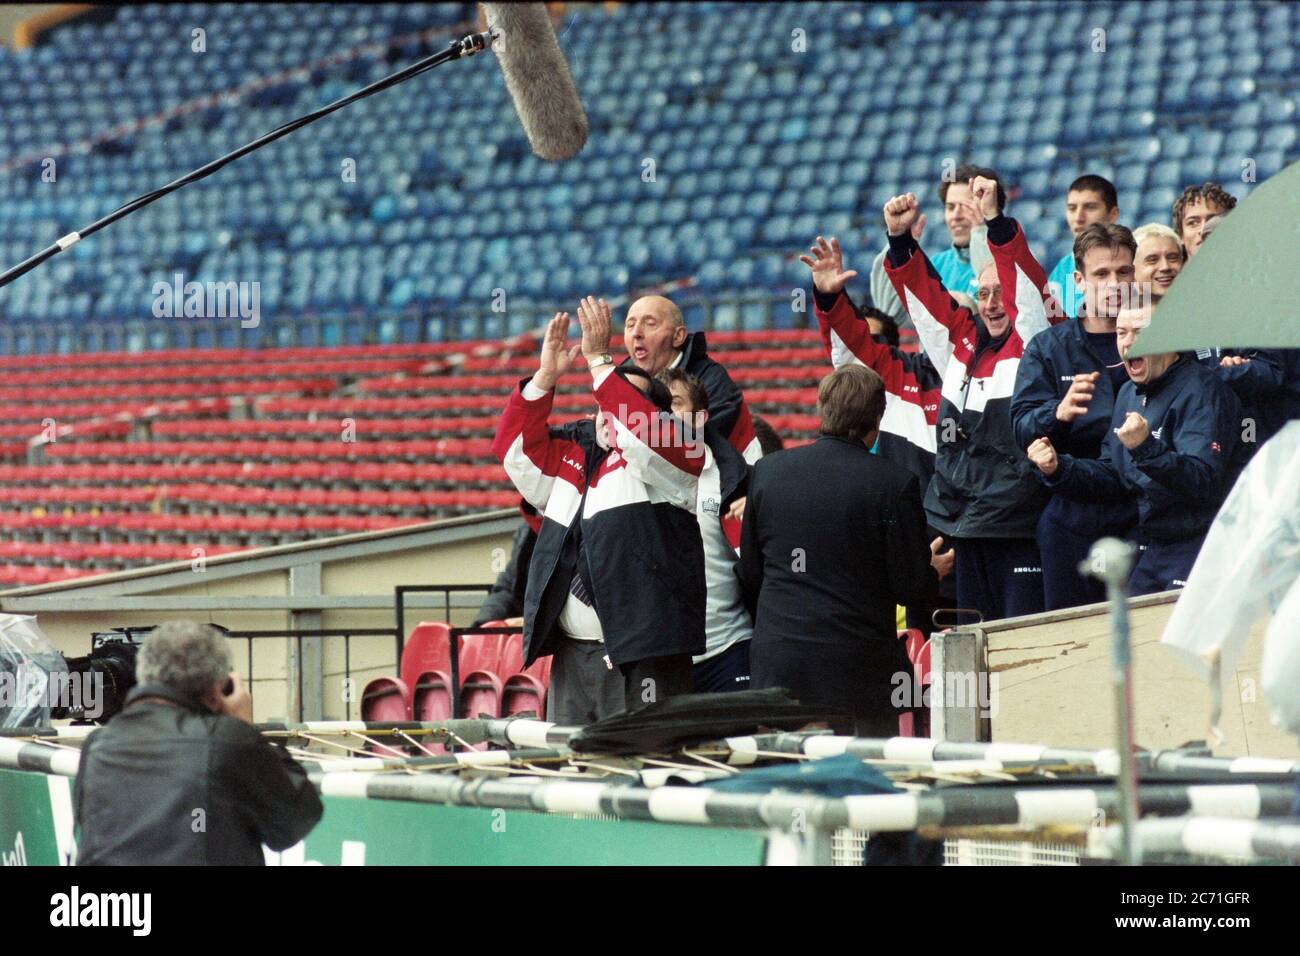 Ricky Tomlinson during filming as he plays Mike Bassett England manager at Wembley Stadium, London 1998 Stock Photo